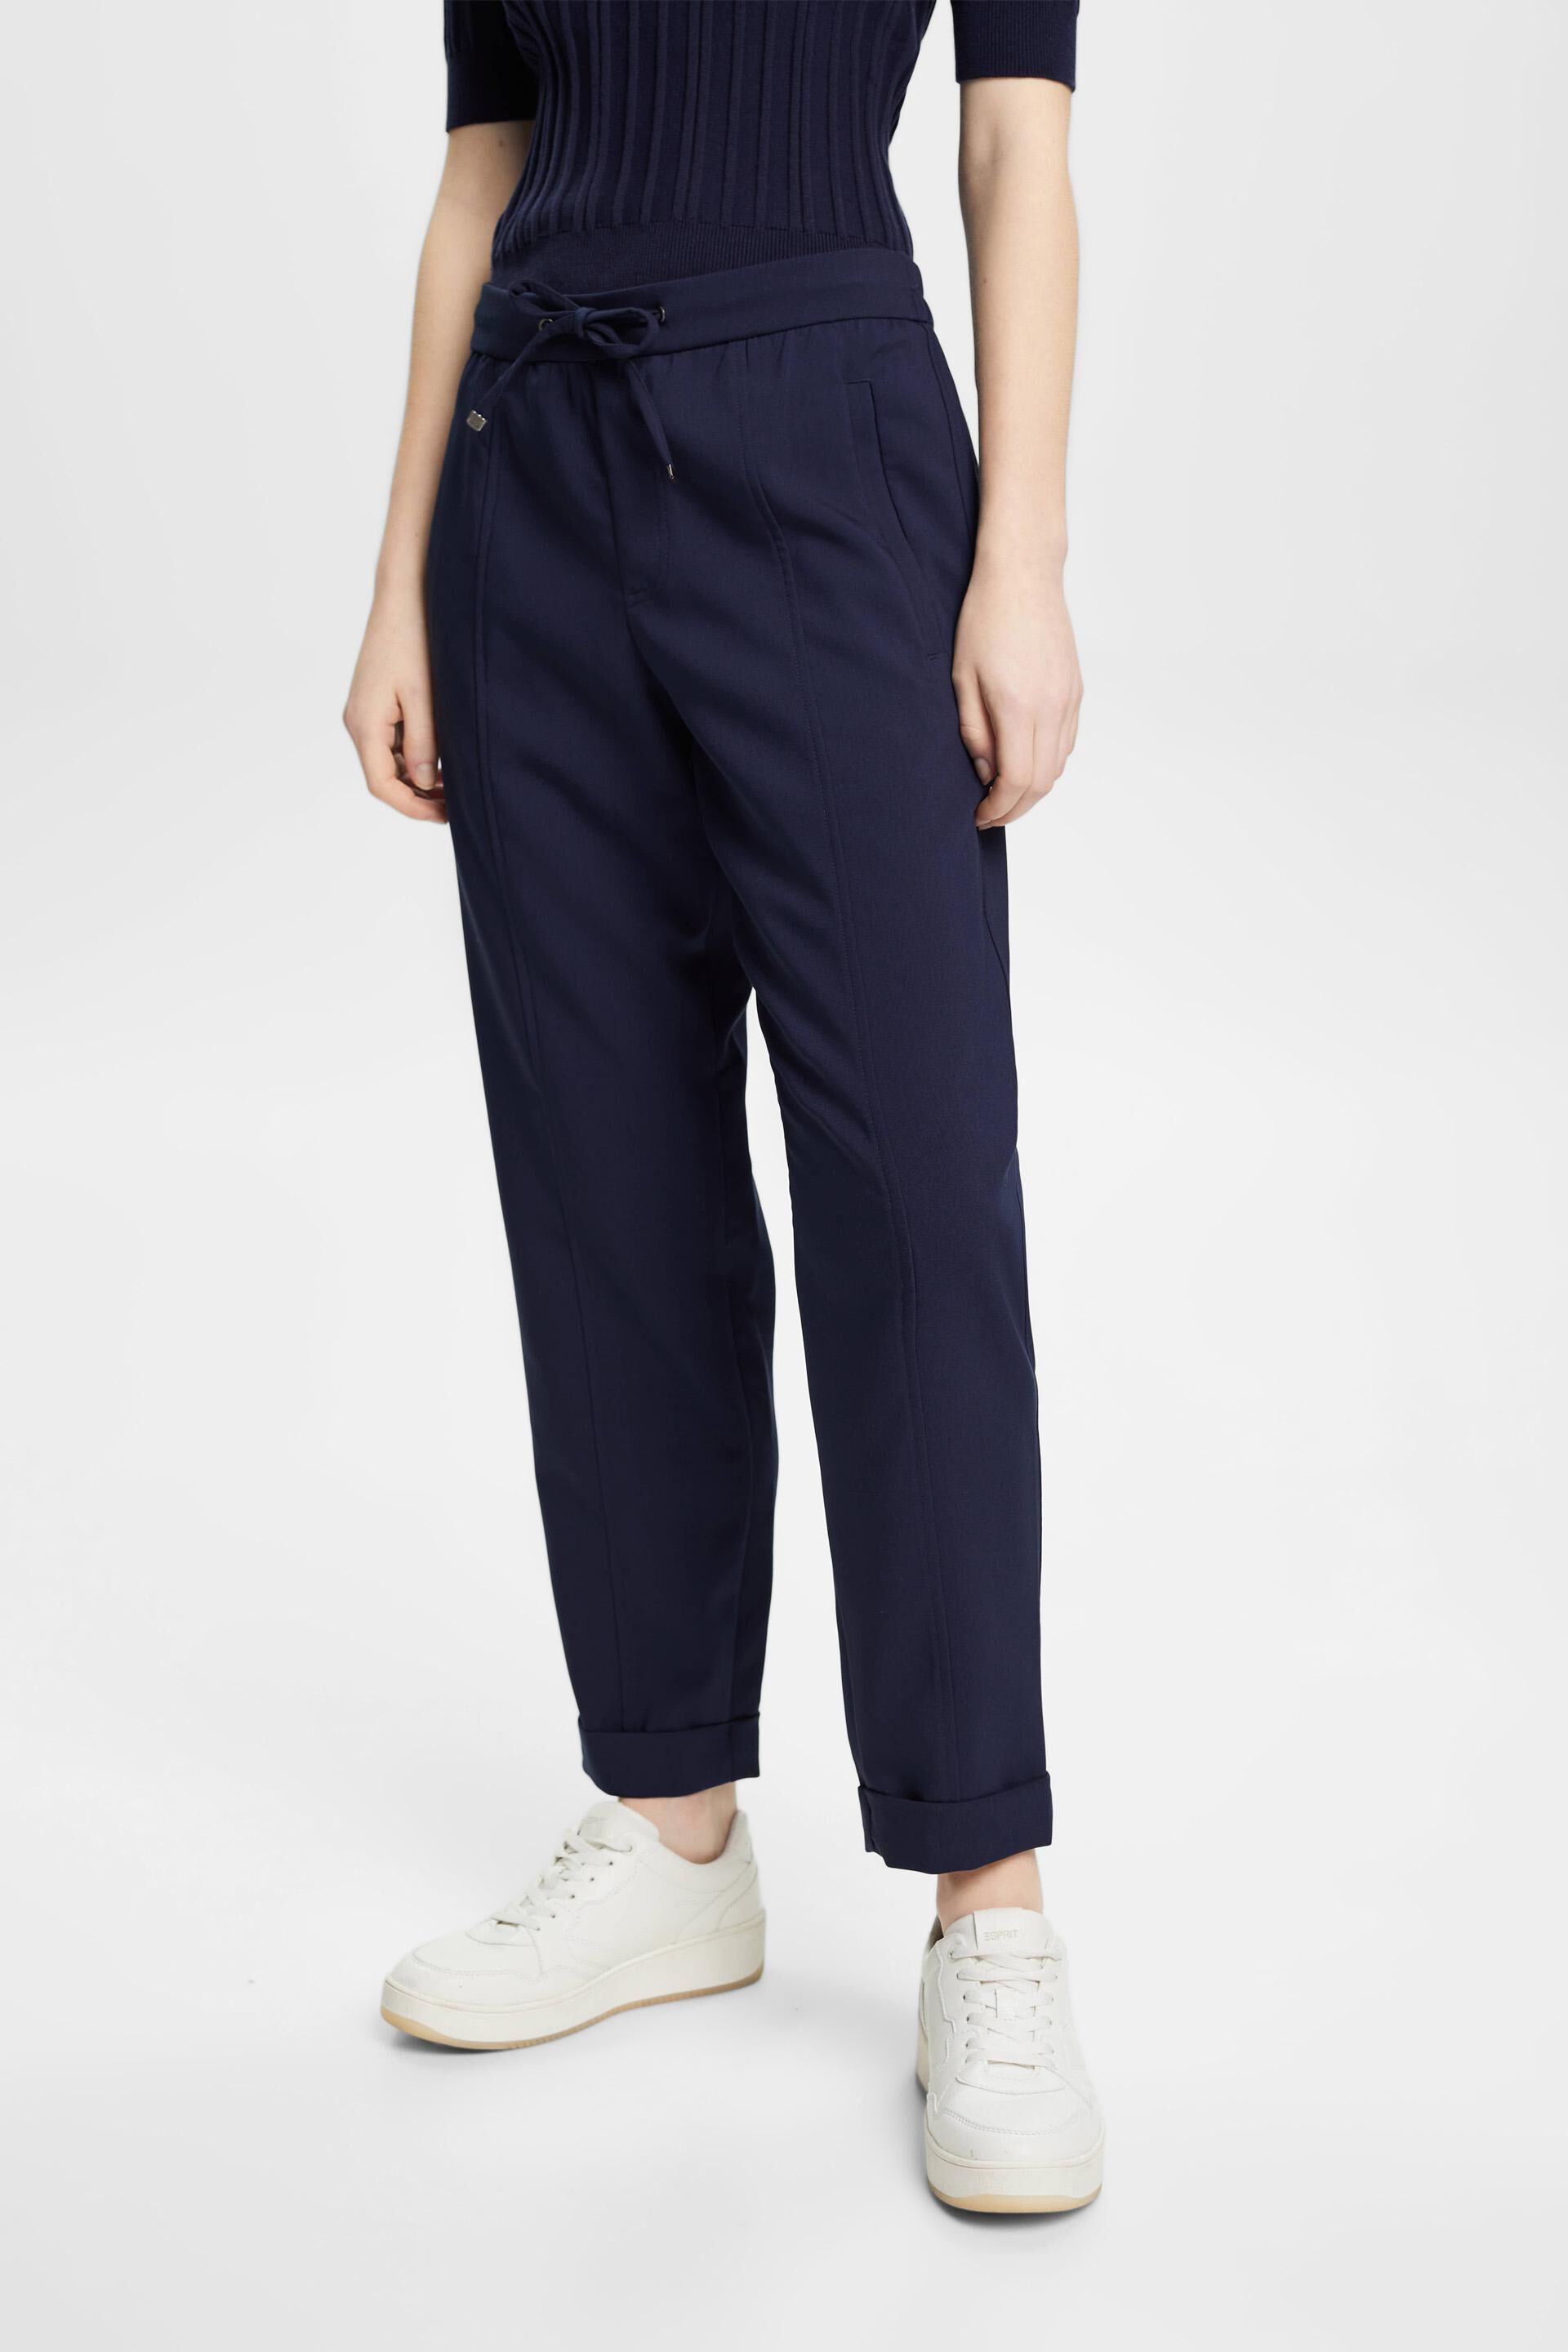 Esprit Jogger trousers style